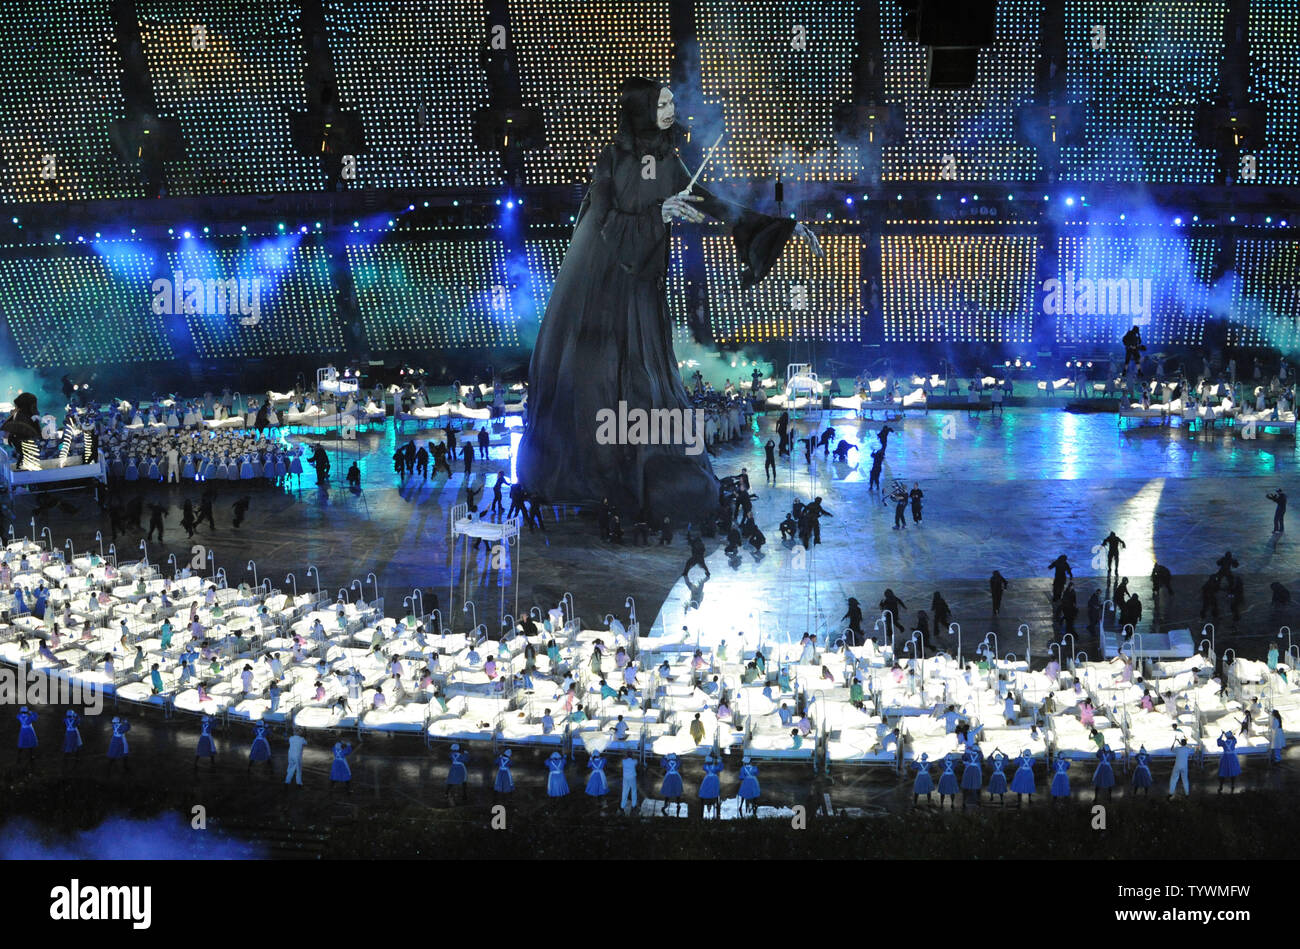 A grim reaper figure is seen during the tribute to health care scene during the Opening Ceremony of the London 2012 Summer Olympics on July 27, 2012 in Stafford, London. The show, created by Academy Award winning director Danny Boyle, celebrates England's history through the use of pop-culture and history.  UPI/Pat Benic Stock Photo